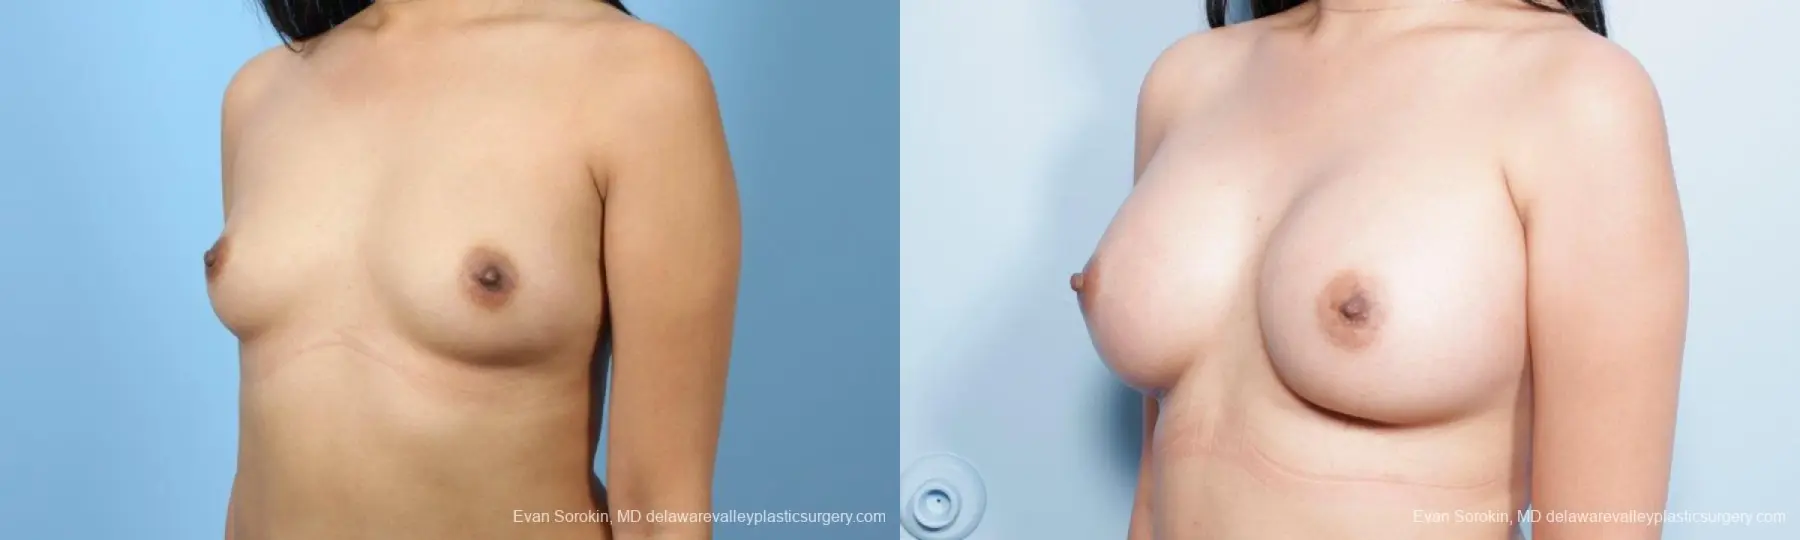 Philadelphia Breast Augmentation 9298 - Before and After 4